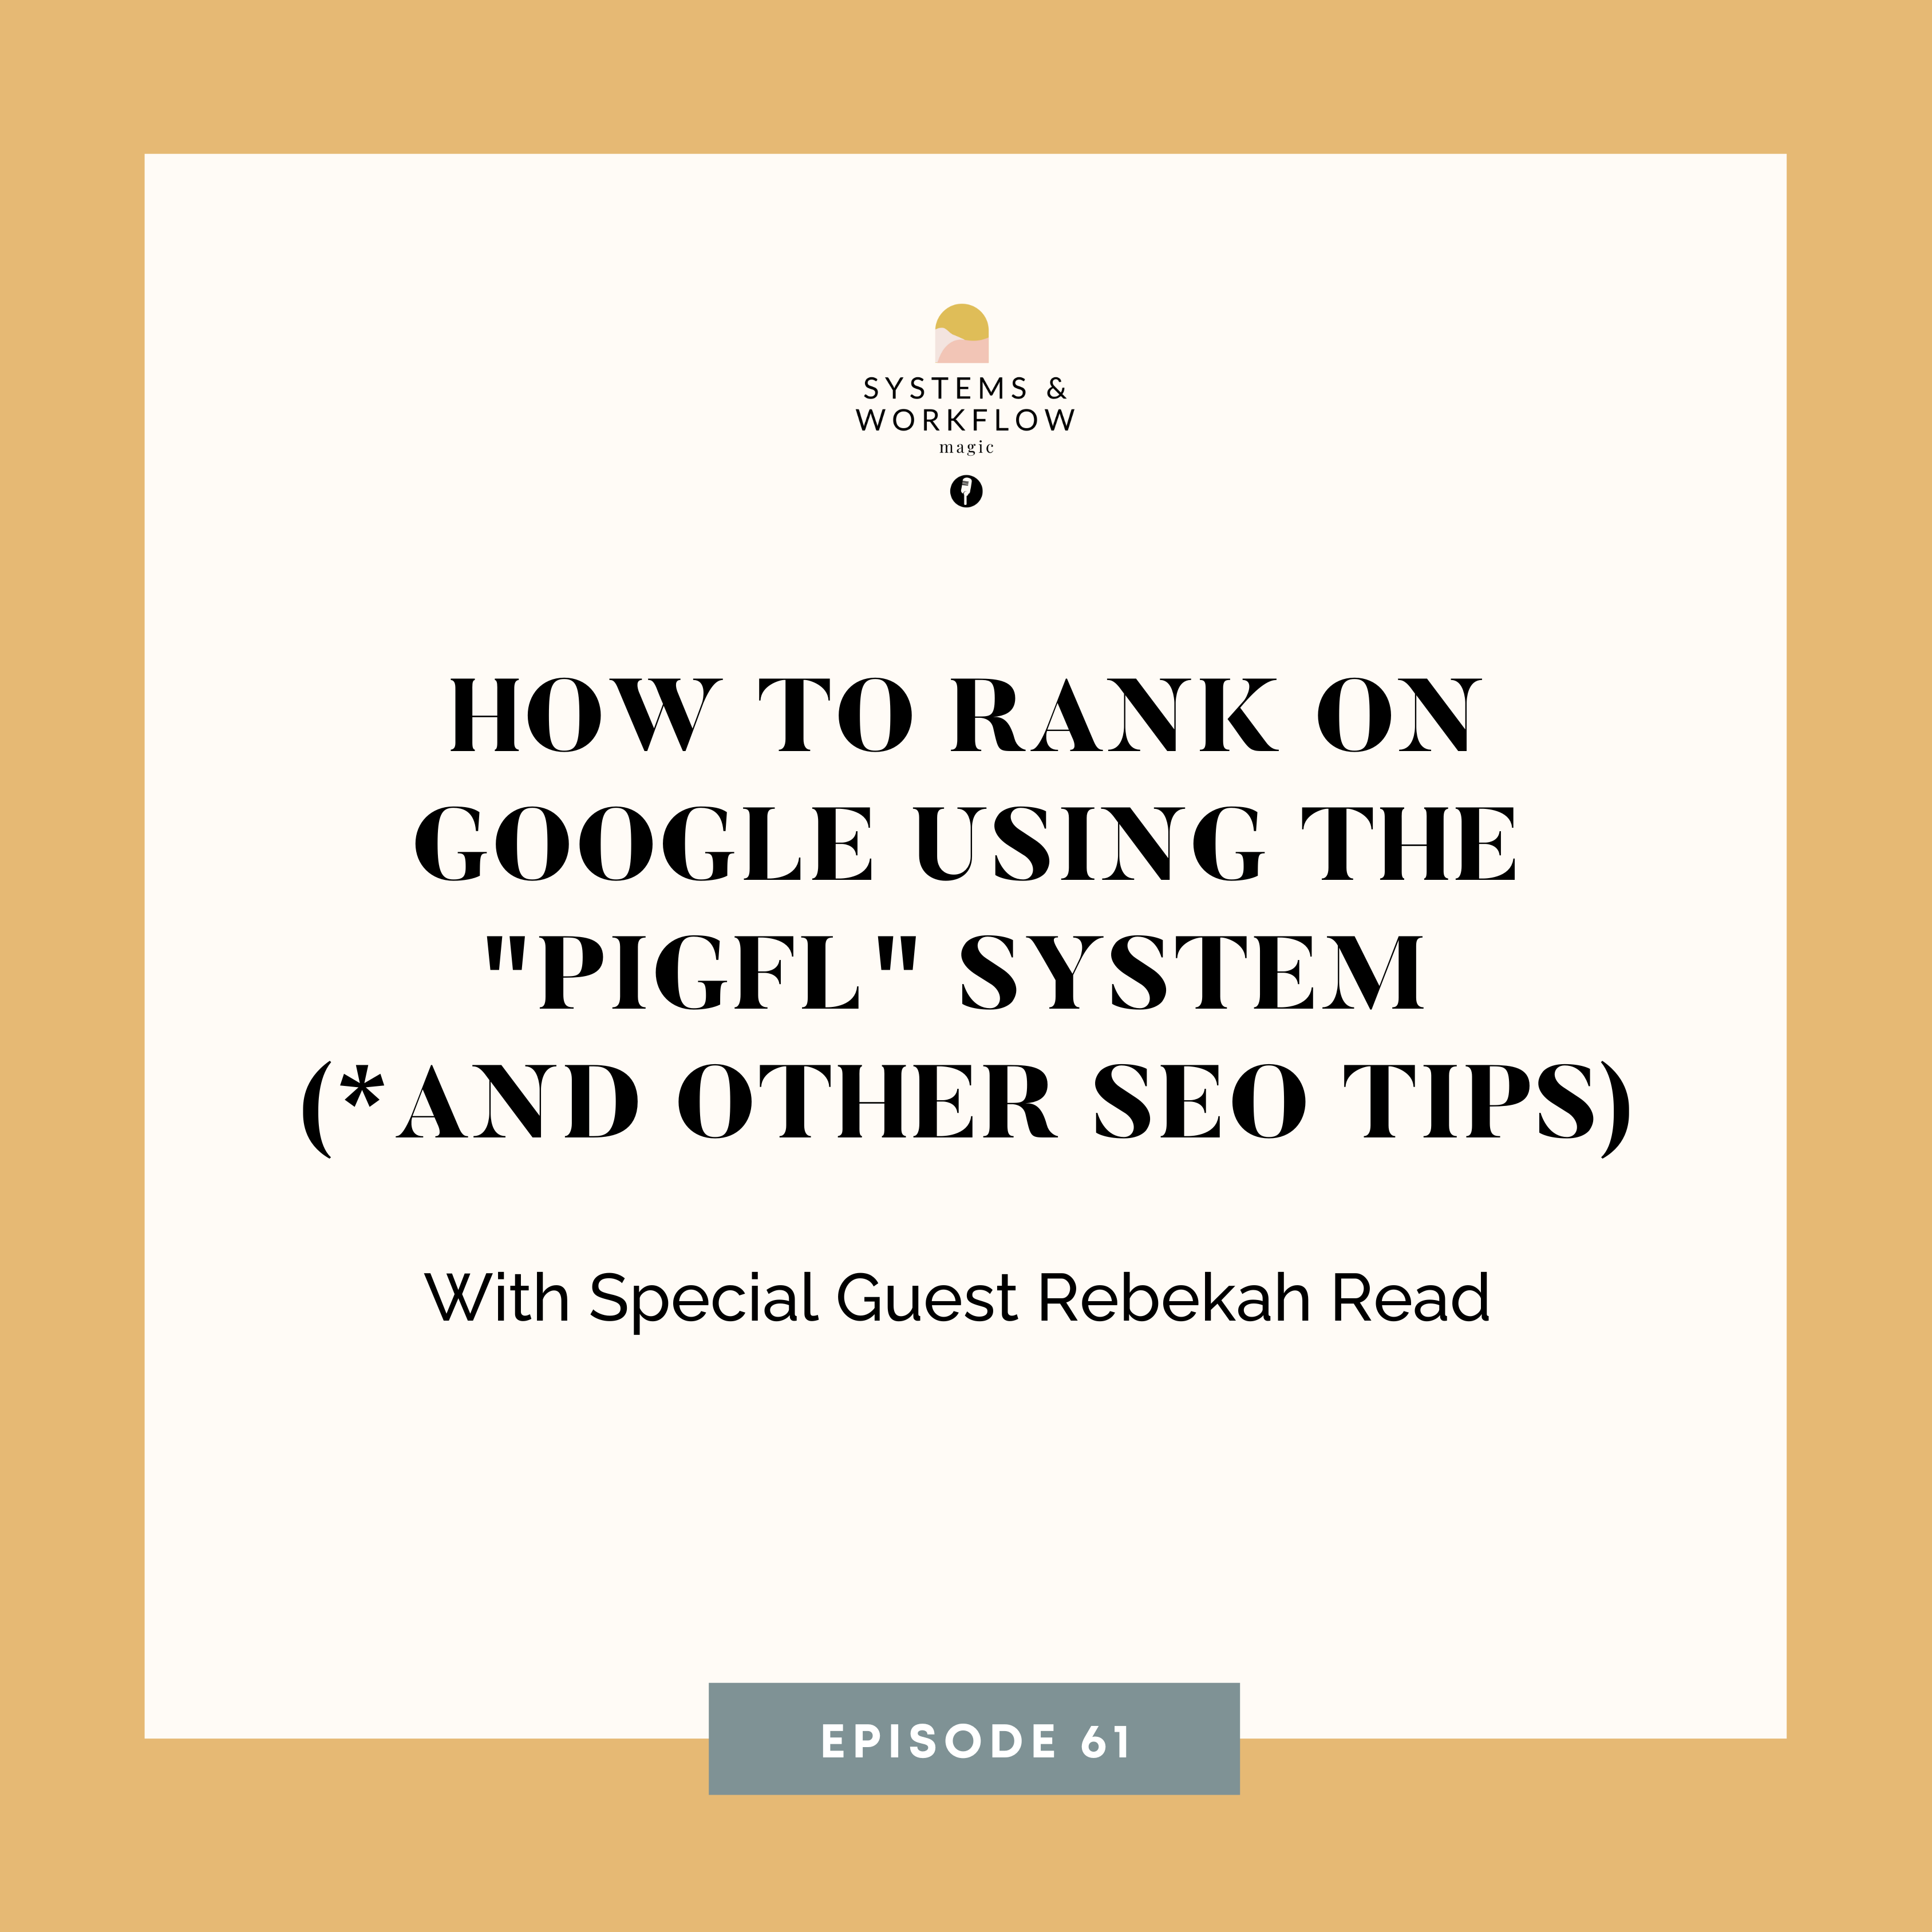 how_to_rank_on_google_using_the_PIGFL_system_on_the_systems_and_workflow_magic_podcast